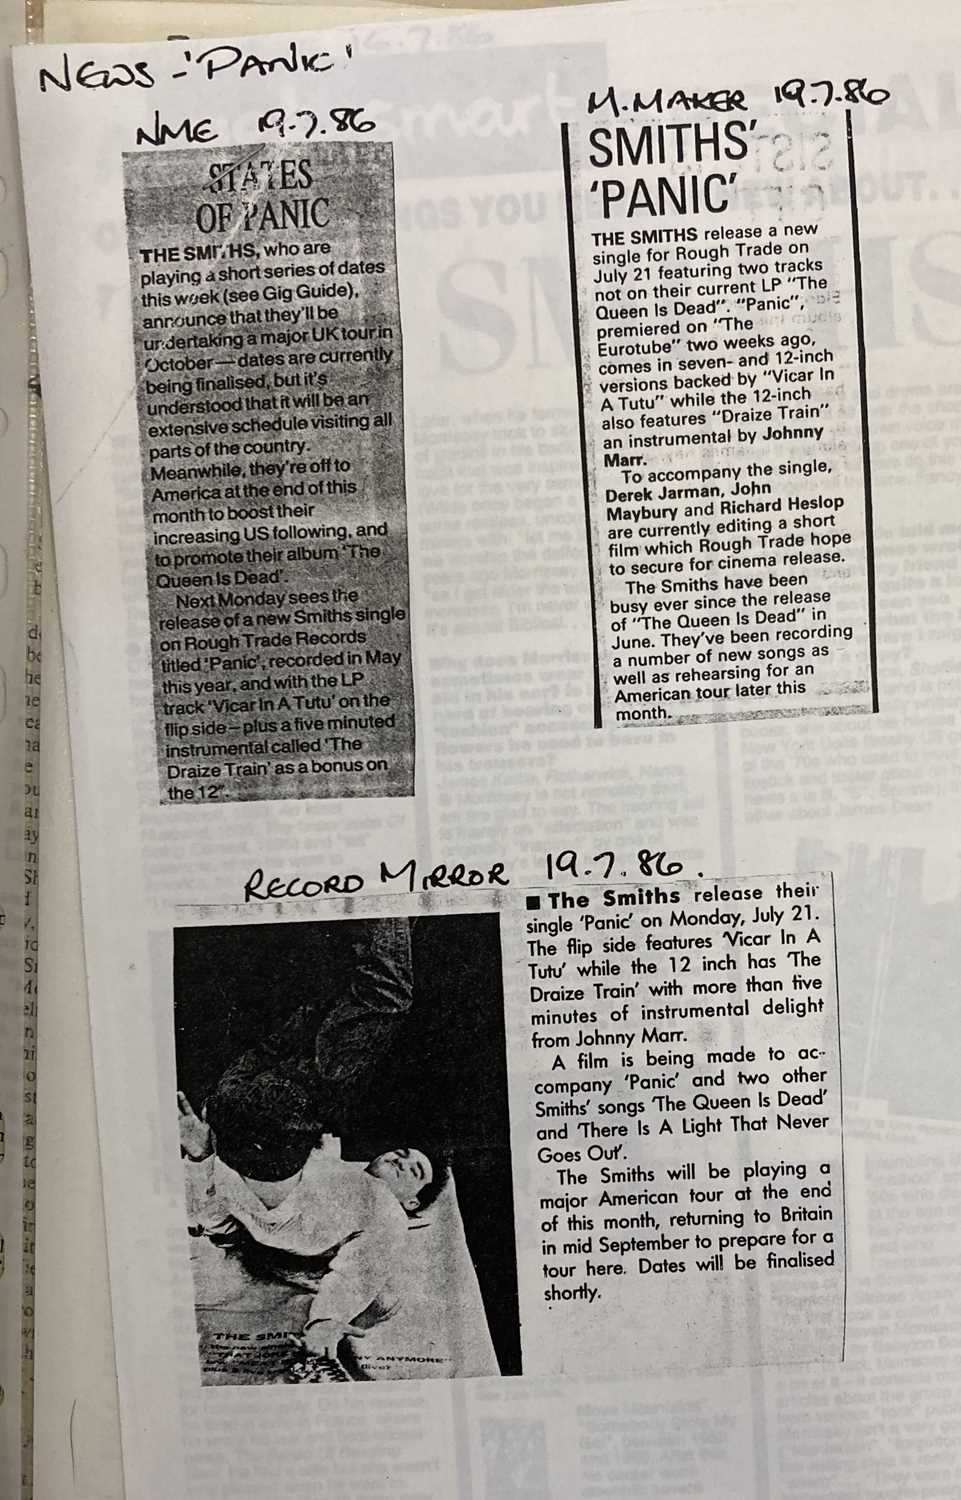 SMITHS PRESS CUTTINGS ARCHIVE - Image 14 of 16